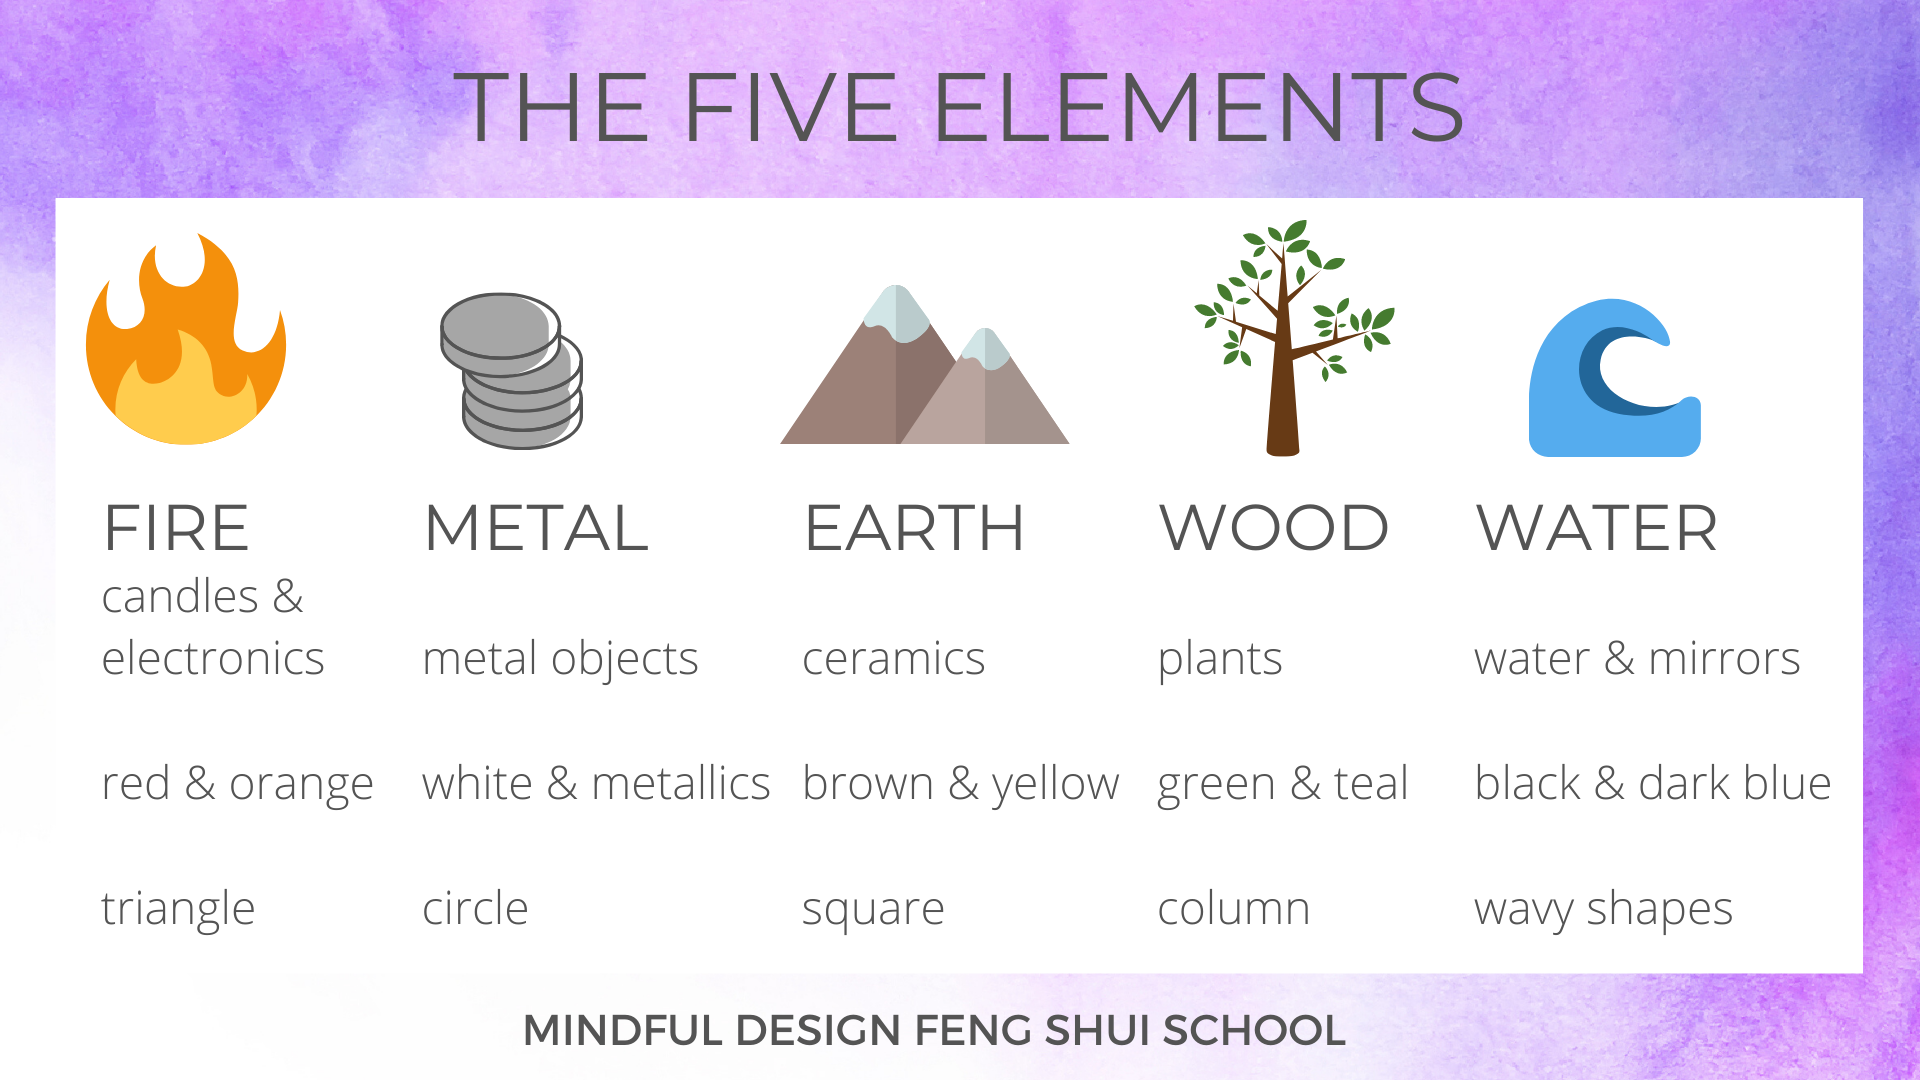 Introduction to the Five Elements